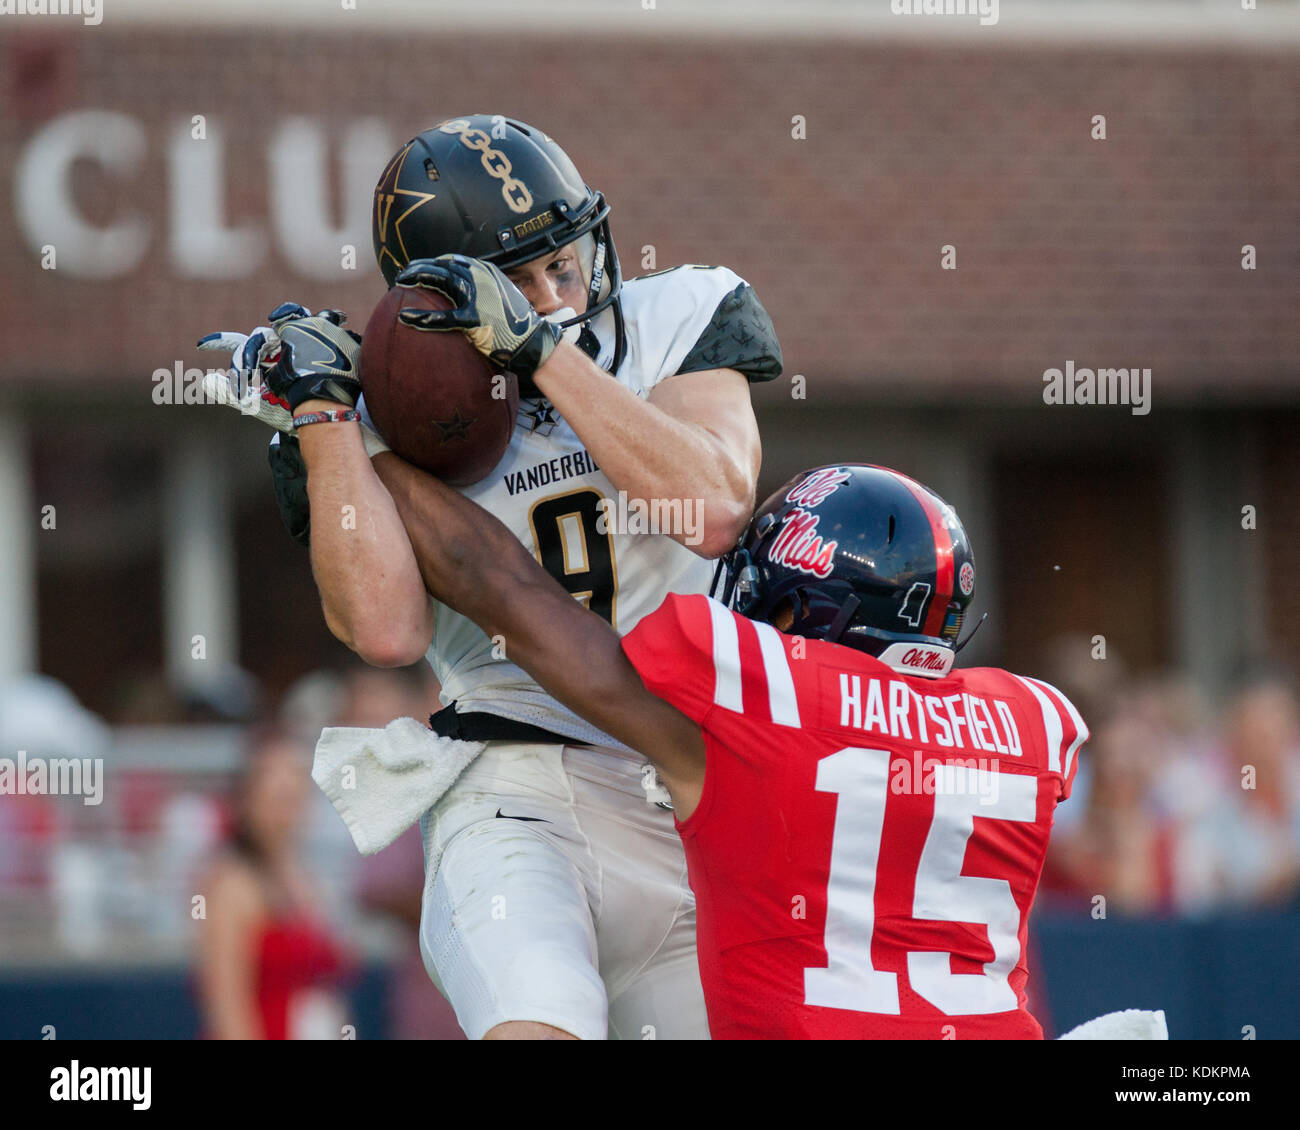 Oxford, USA.  14th October 2017. Vanderbilt Wide Receiver Caleb Scott (9) leaps over University of Mississippi Defensive Back Myles Hartsfield (15) to make the catch at Vaught-Hemingway Stadium in Oxford, Mississippi, on Saturday, October 14, 2107.  Credit: Kevin Williams/Alamy Live News. Stock Photo